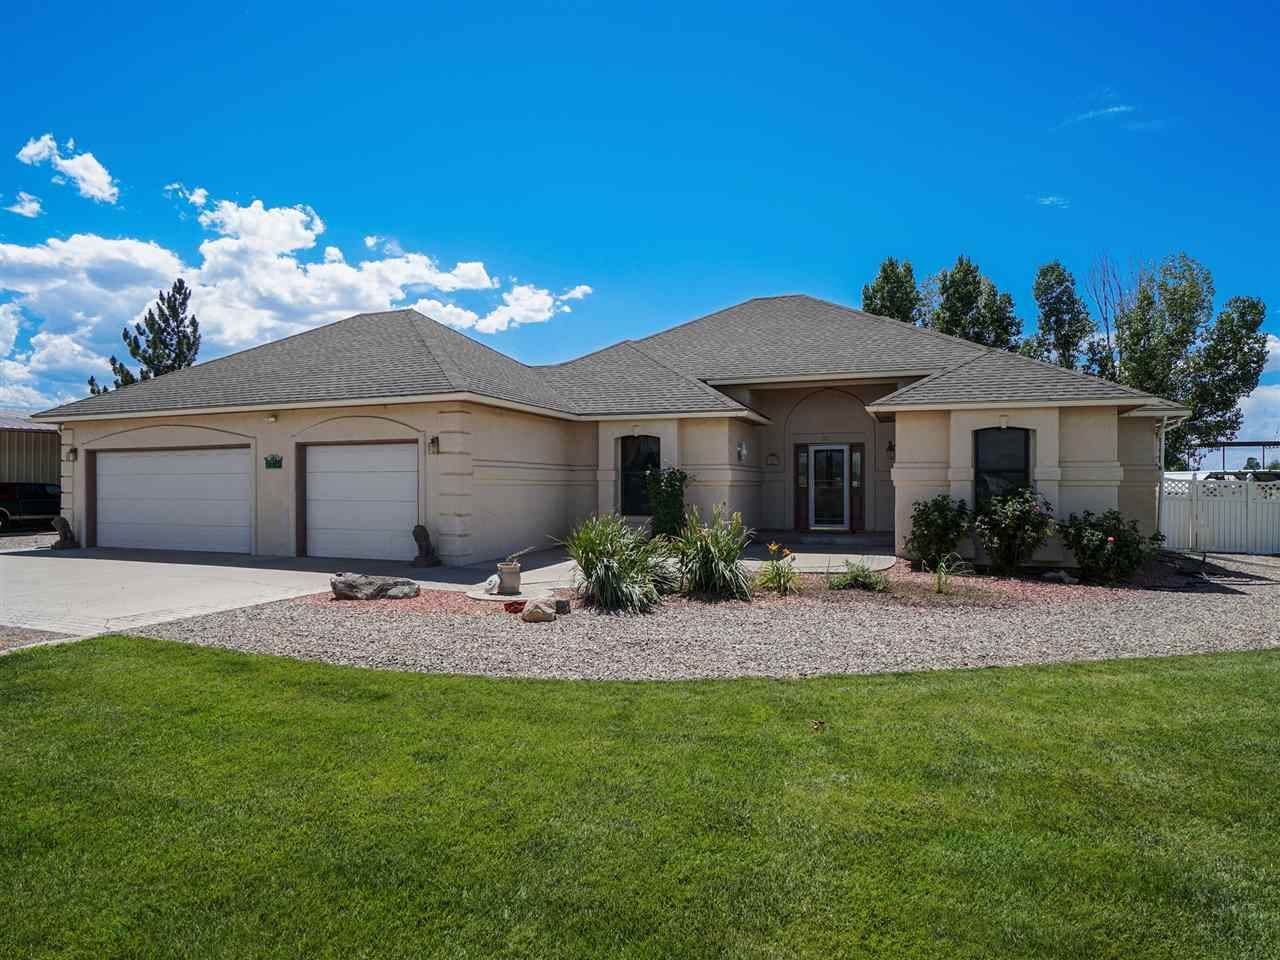 911 22 Road, Grand Junction, CO 81505